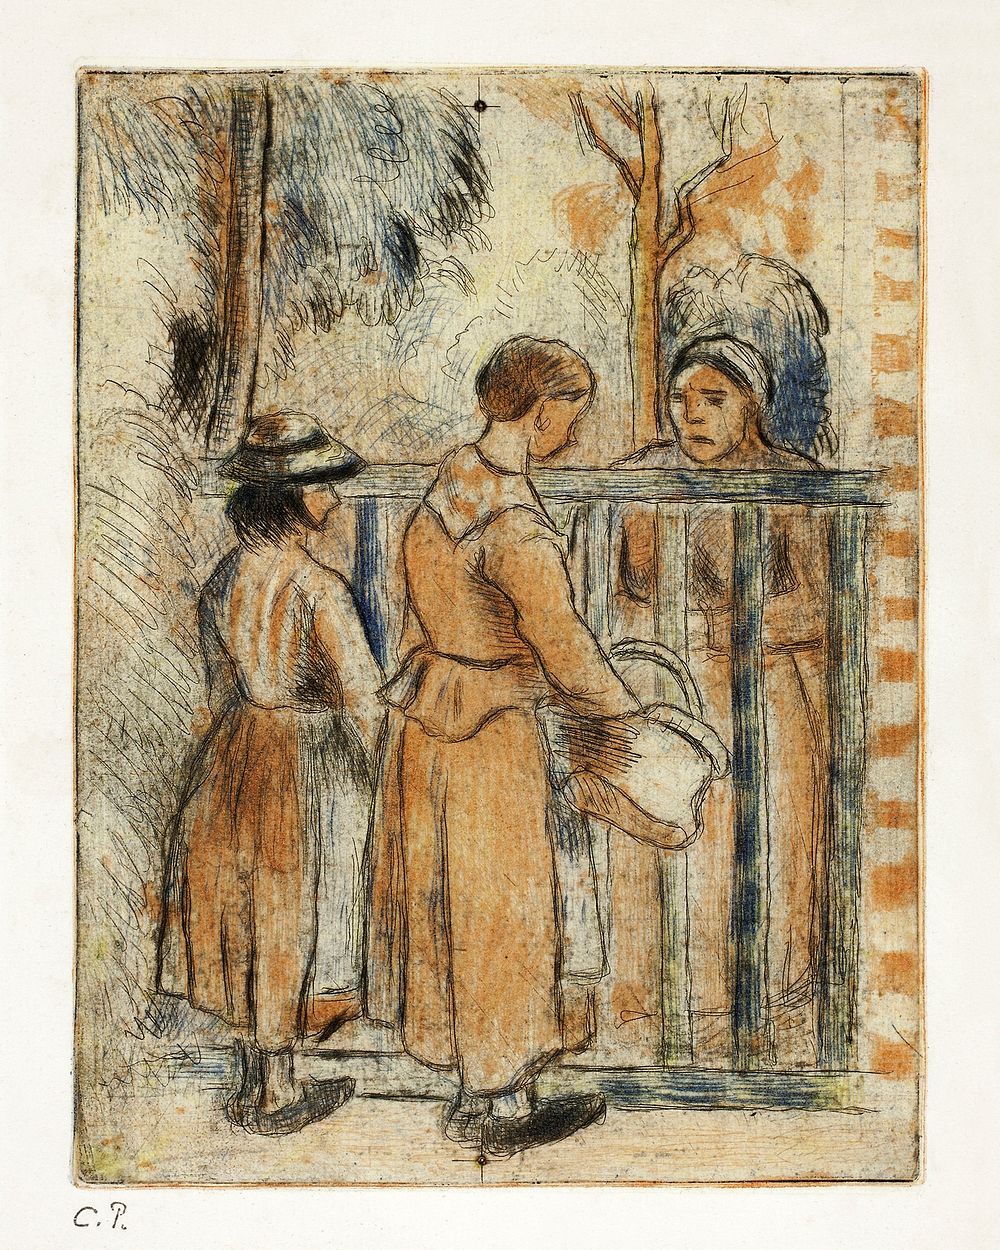 Beggar Women (ca. 1894, printed 1930) by Camille Pissarro. Original from The Art Institute of Chicago. Digitally enhanced by…